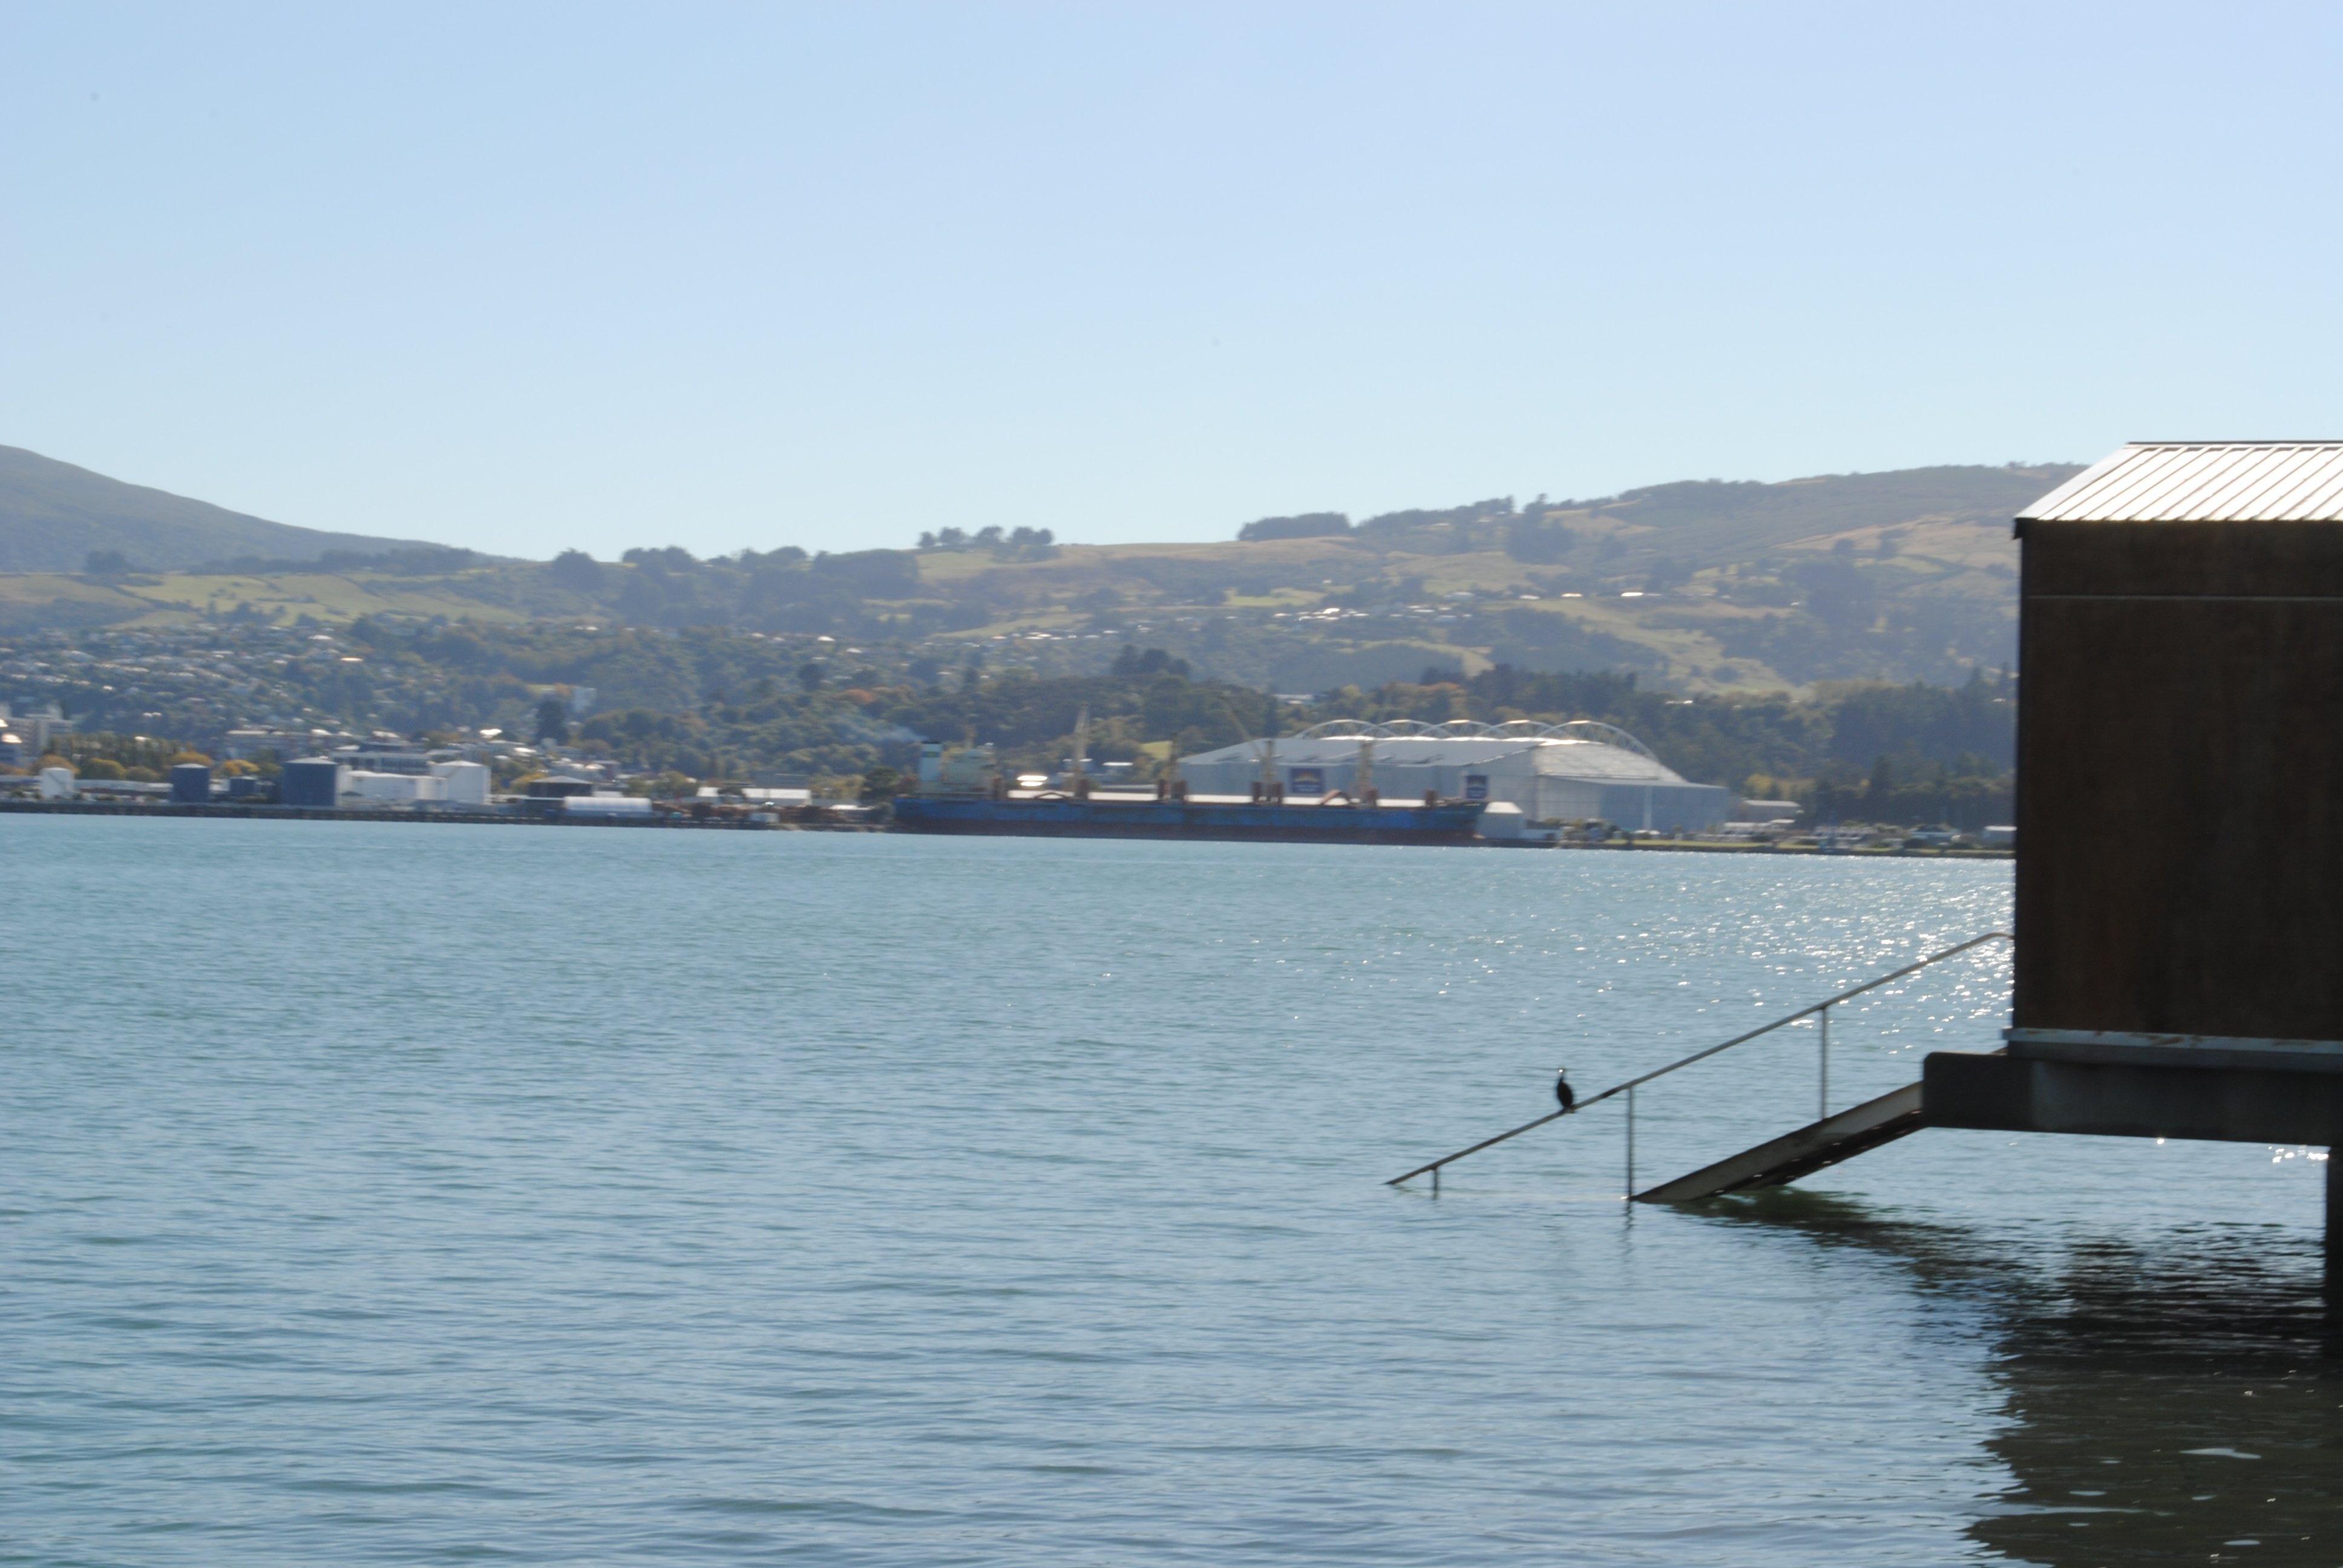 Tour the inner route of the Otago Peninsula. 
https://t.co/4Mh8xwnYmH (iPhone) or https://t.co/mt1rQLJbdp (Android)